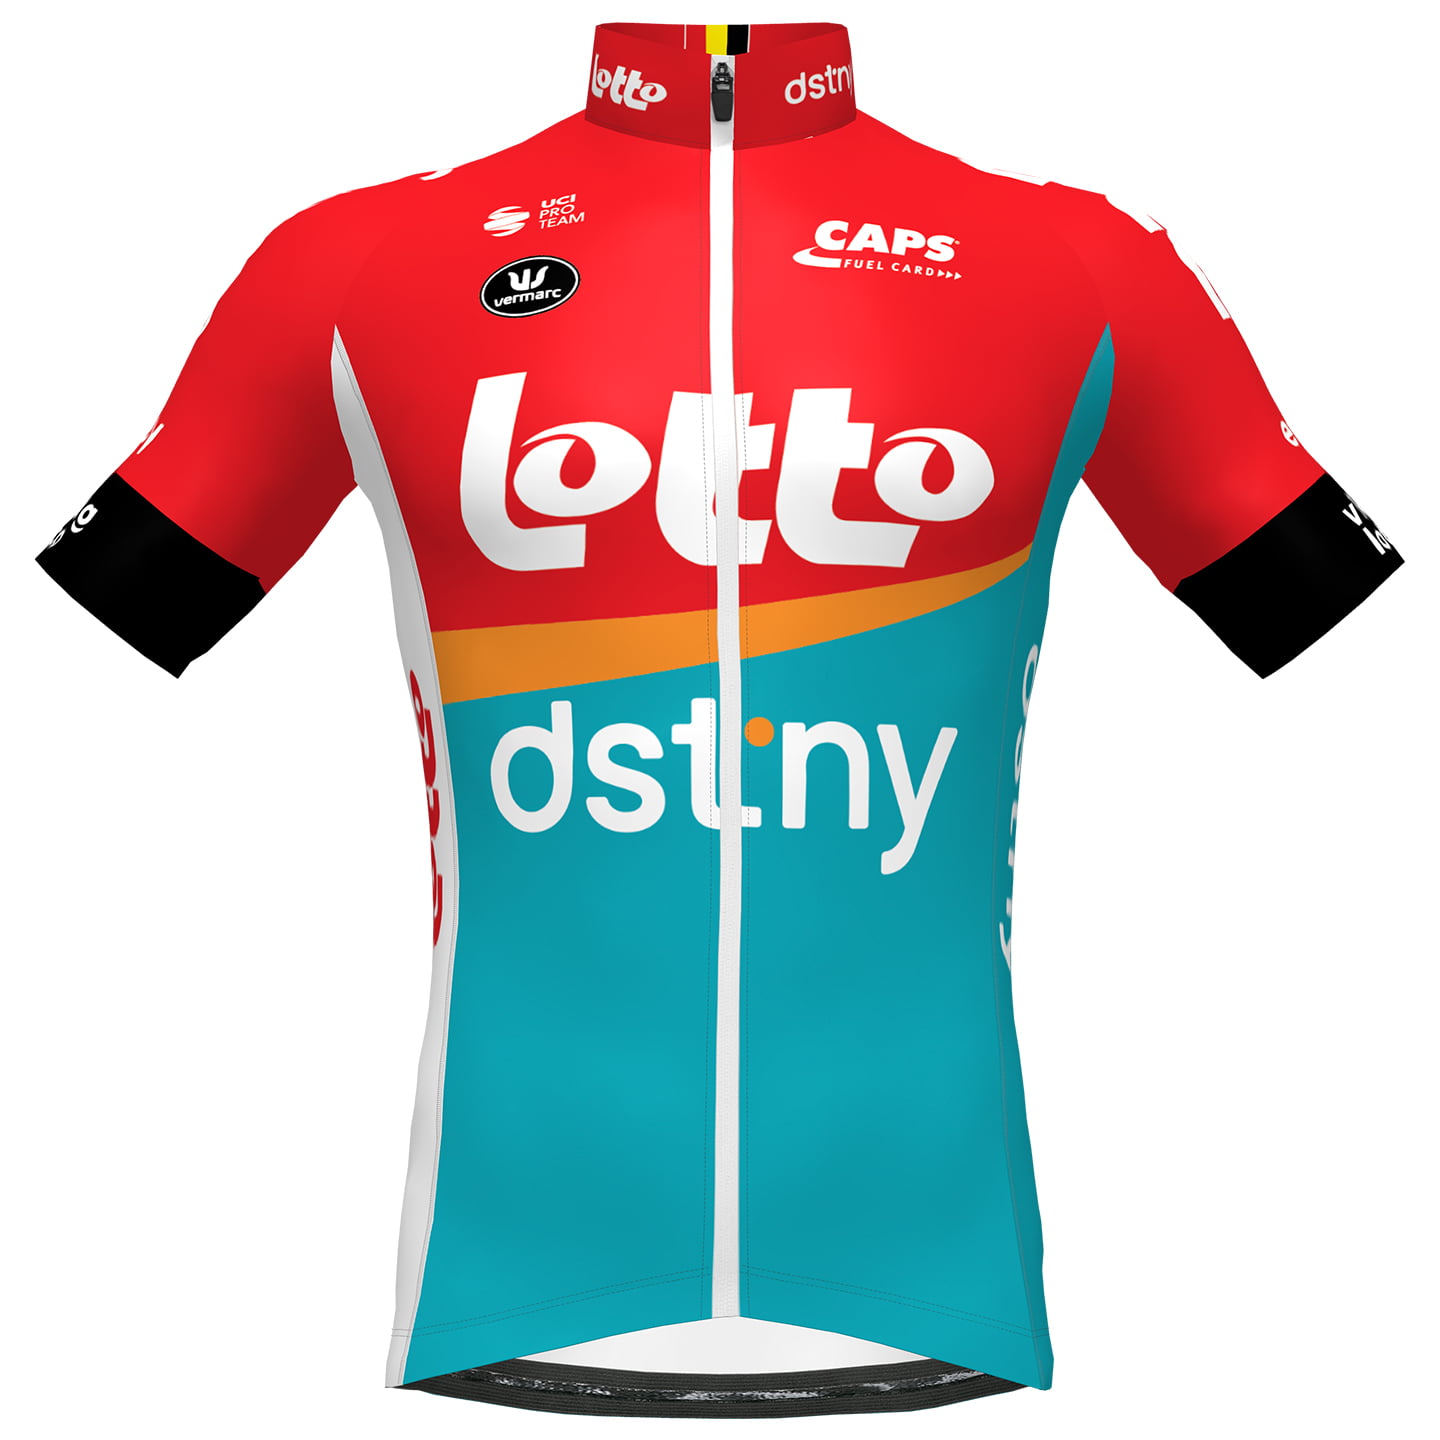 LOTTO DSTNY Aero 2023 Short Sleeve Jersey, for men, size S, Cycling jersey, Cycling clothing